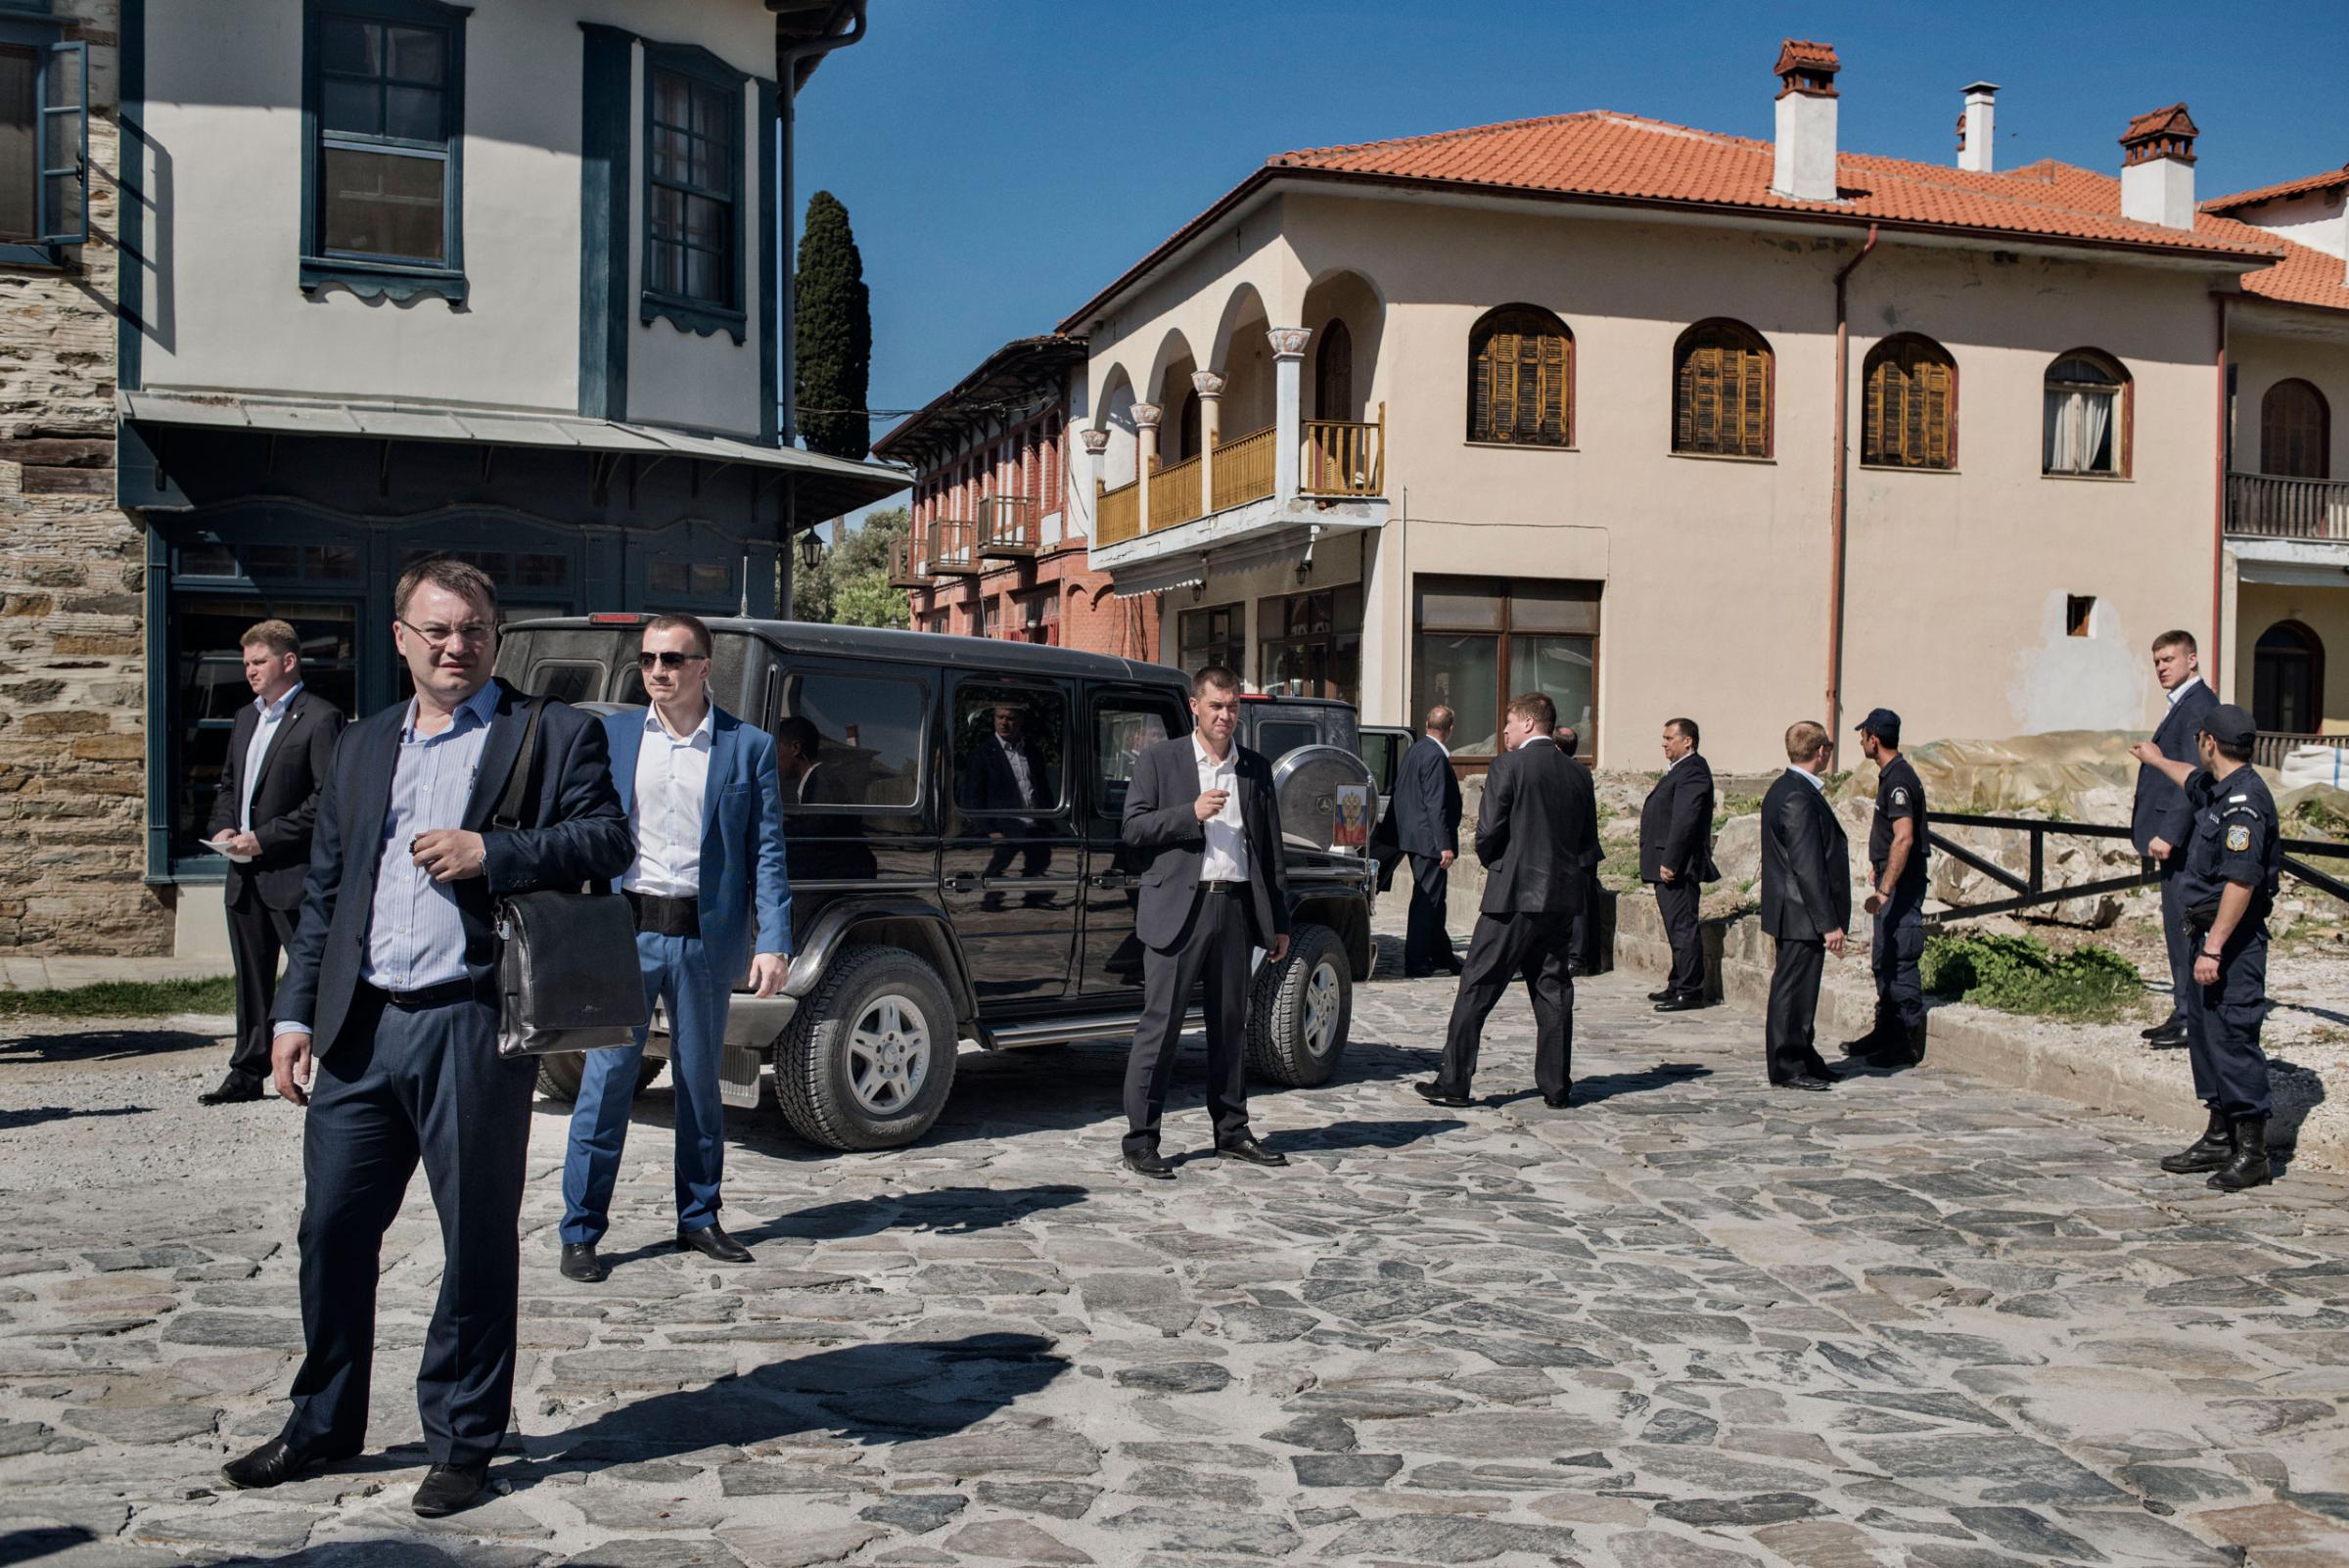 Russian secret service agents and Greek police officers surround a black Mercedes SUV carrying Russian President Vladimir Putin as he arrives in Karyes, the capital of Mount Athos, a self-governing community of Orthodox Christian monks in northern Greece, May 28, 2016.